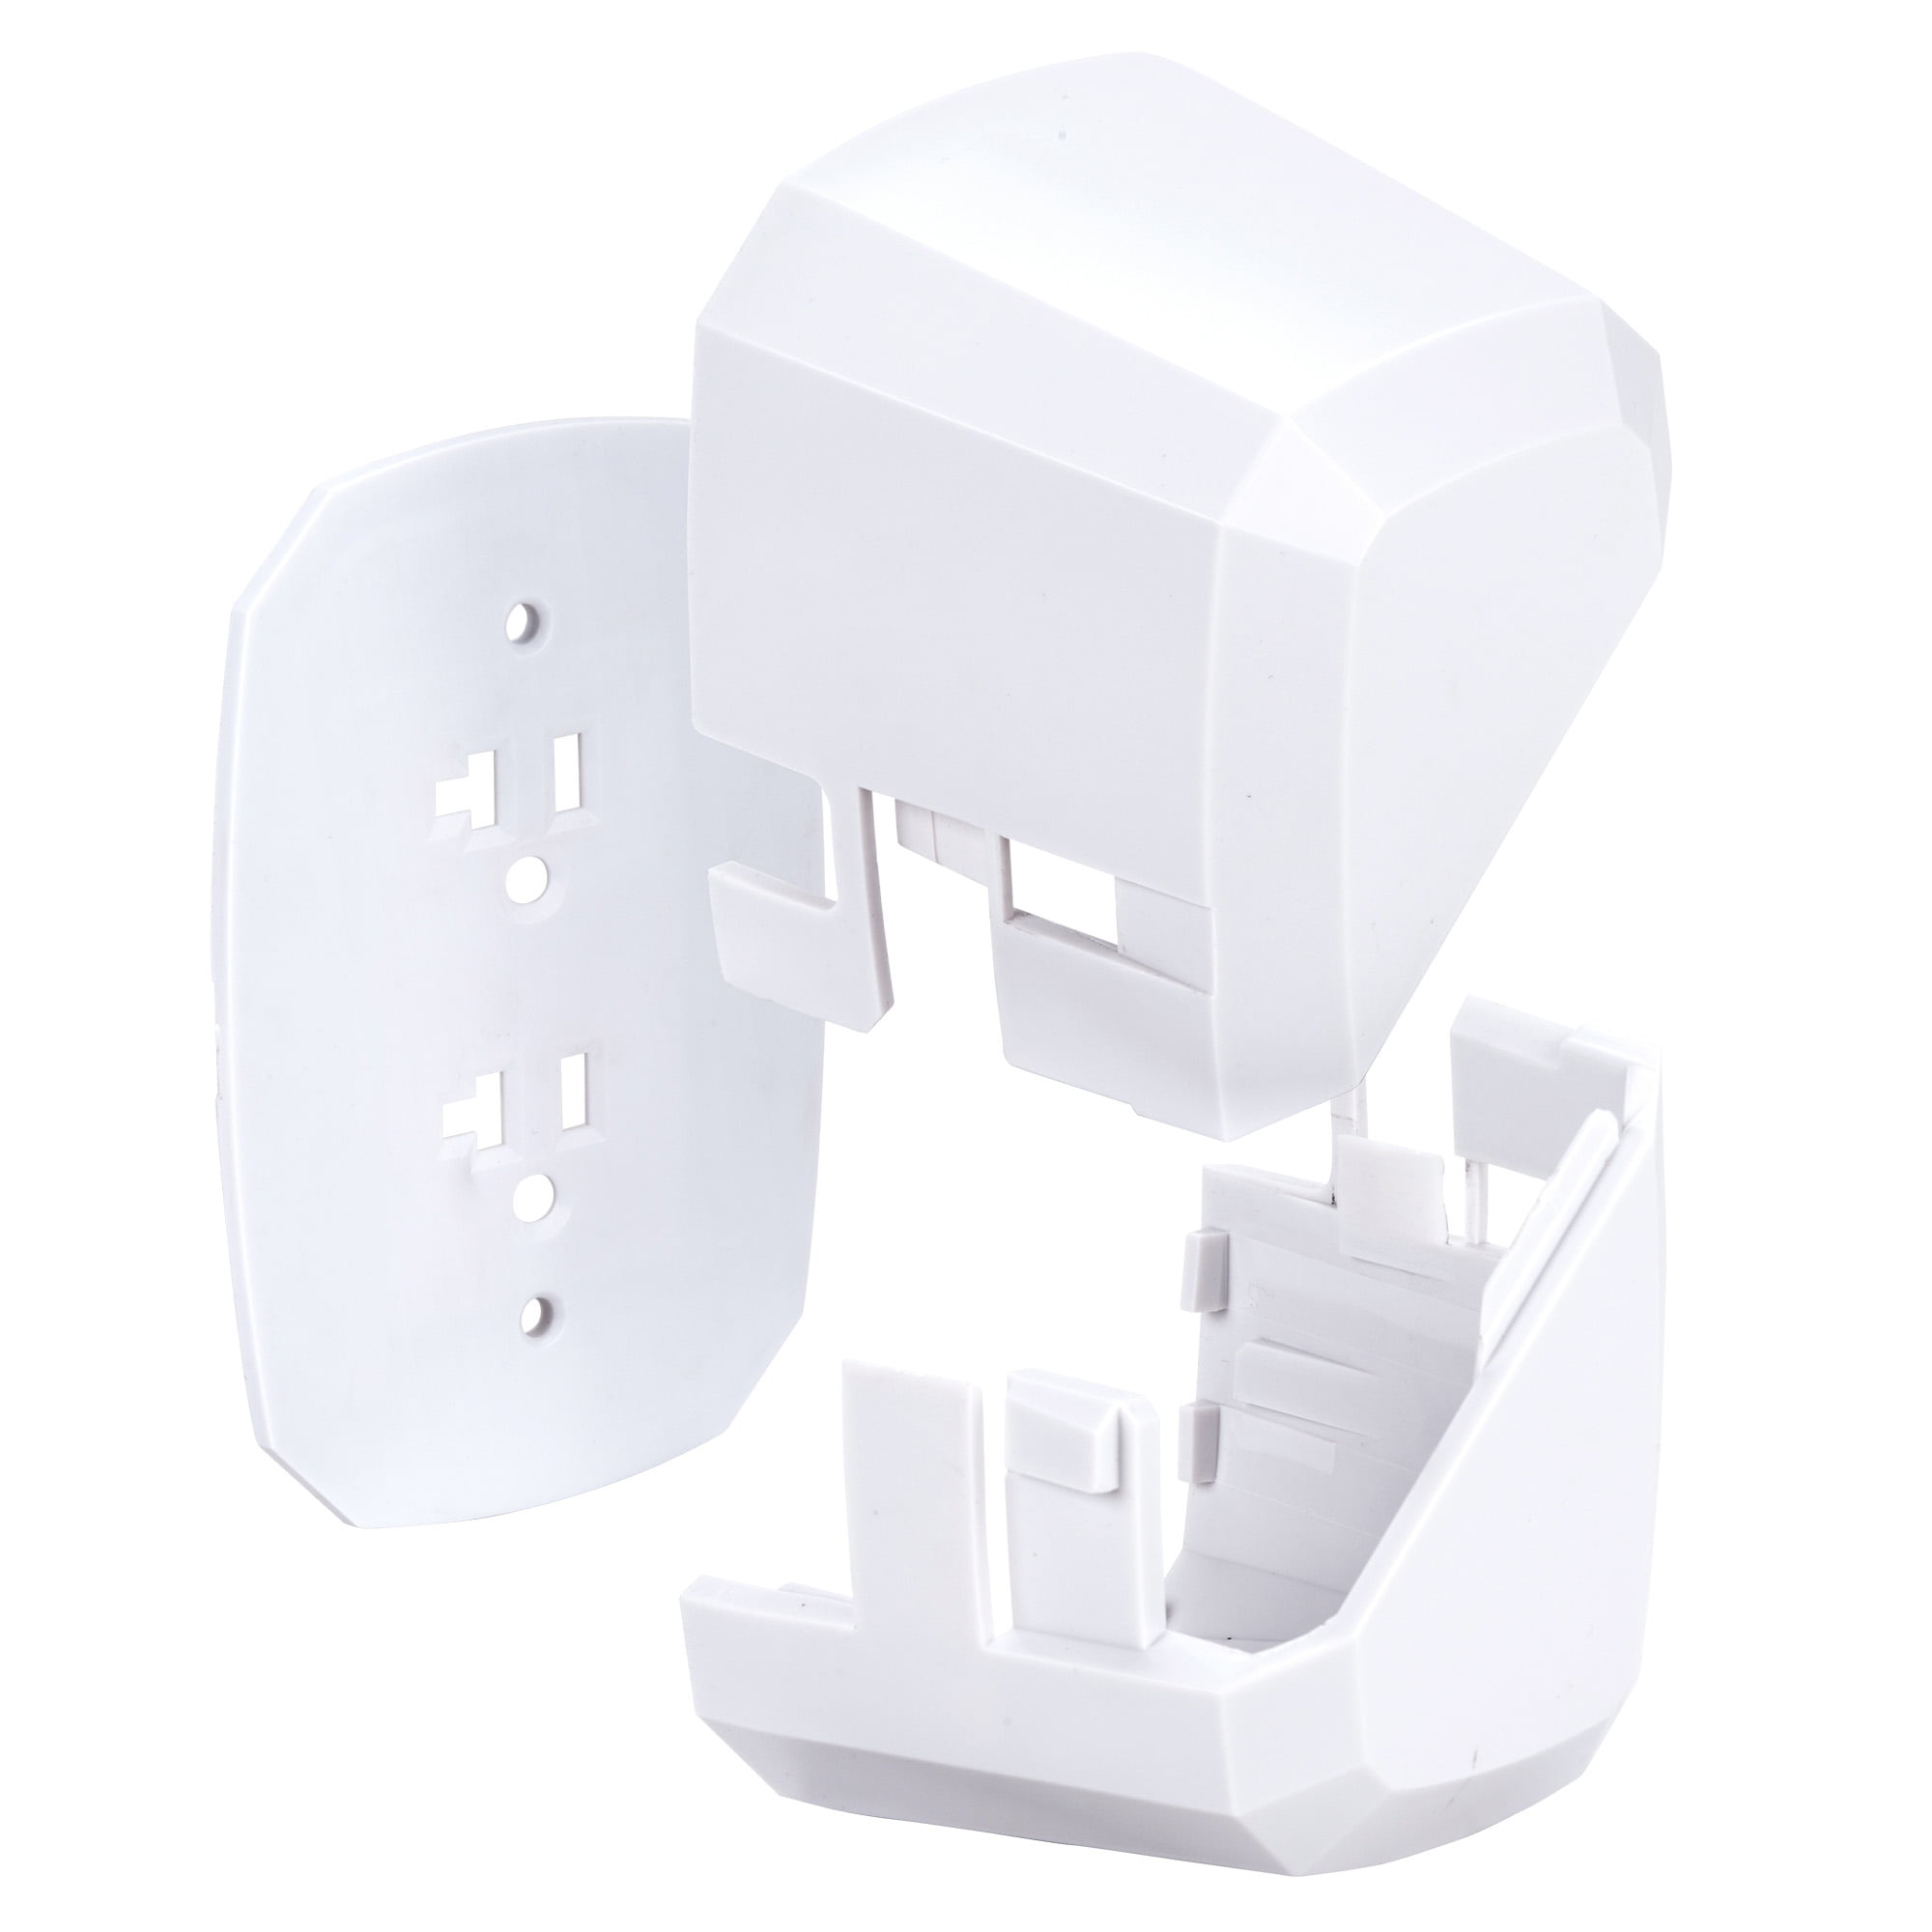 Outlet Cord Cover- Sliding Door Electrical Socket Protector- For  Childproofing Safety & Prevents Unplugging- Deep Wall Receptacle Box by  Edison Supply 